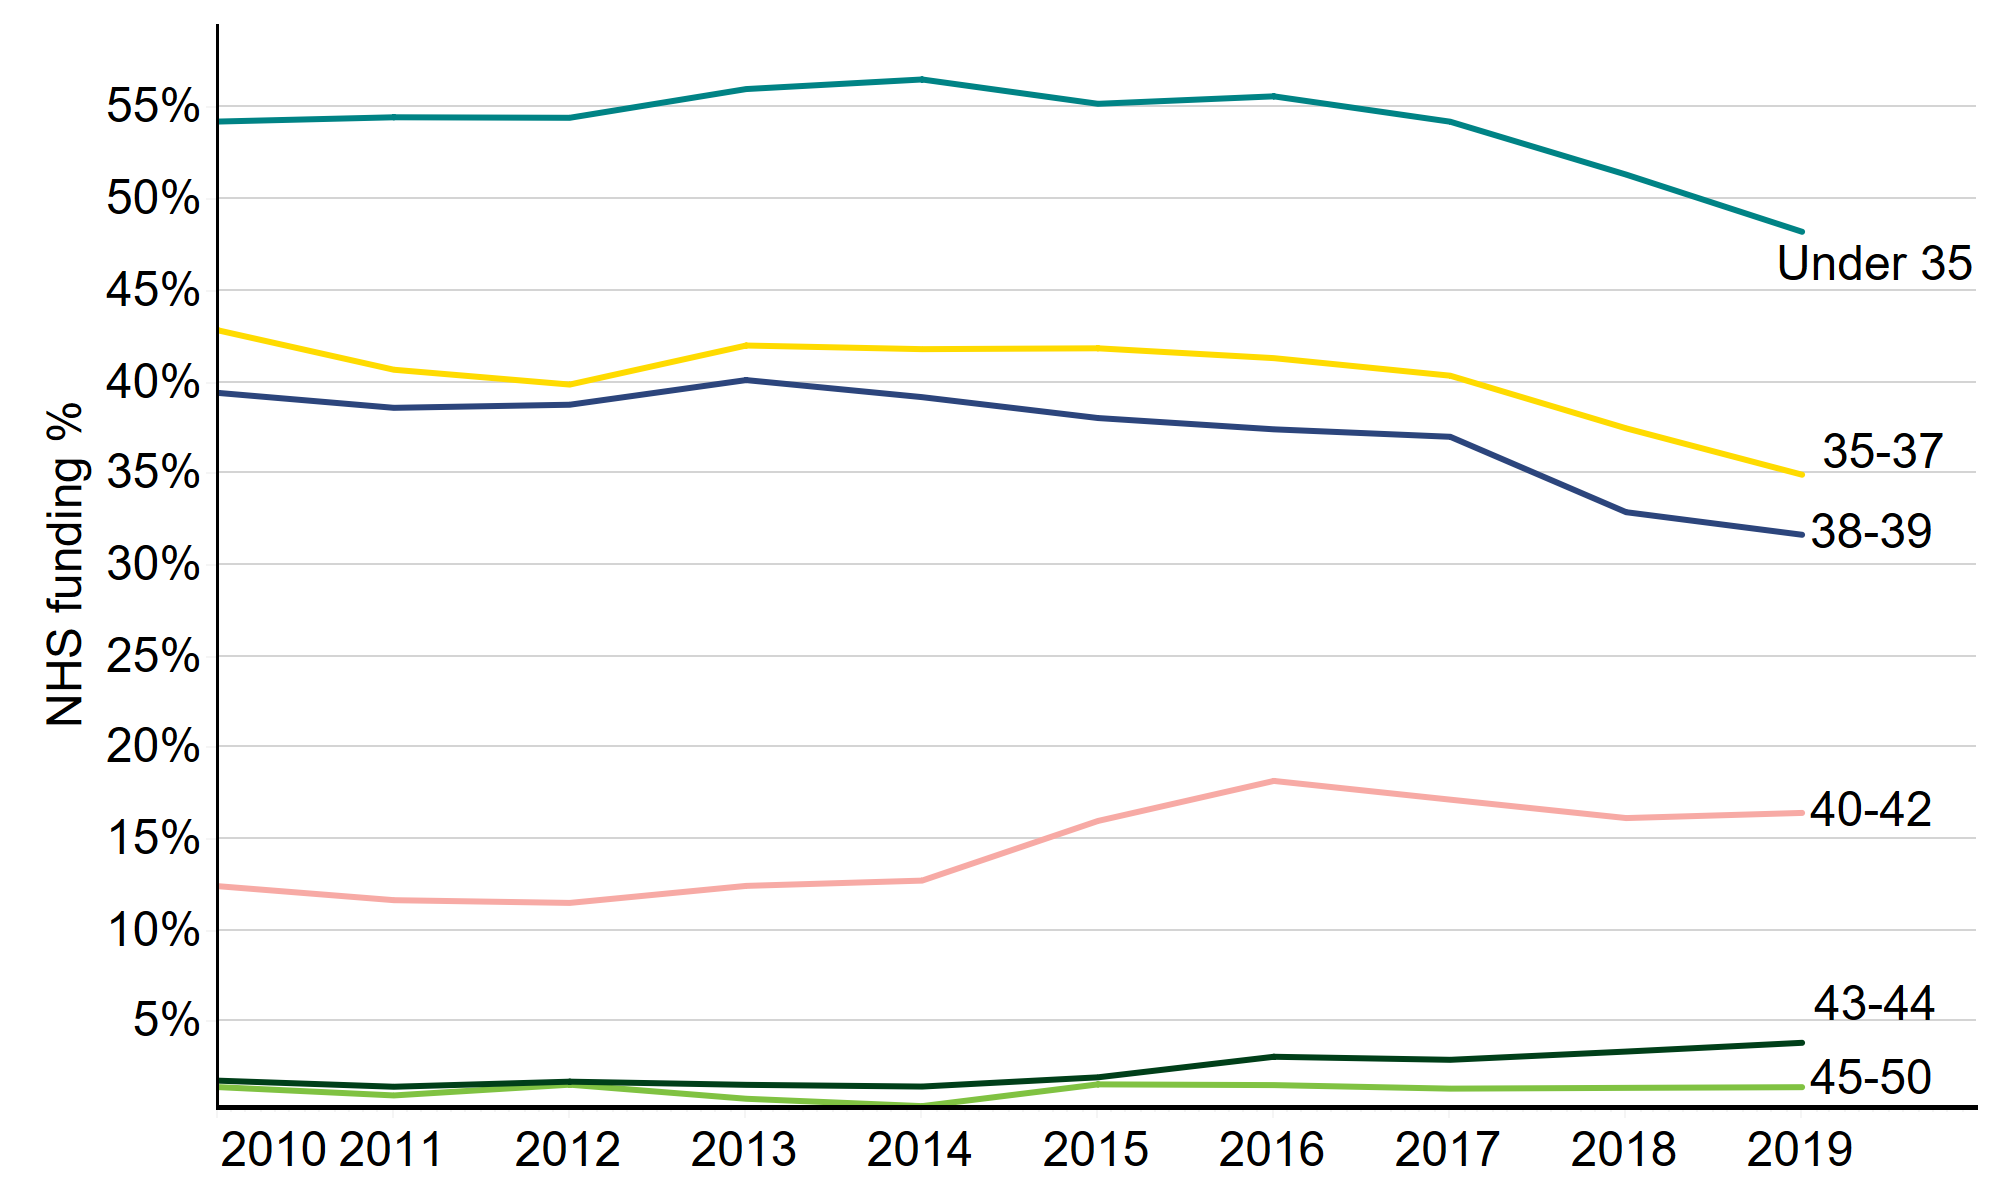 This line chart shows the proportion of NHS funded IVF cycles by patient age groups from 2009 to 2019. The age groups are; under 35, 35-37, 38-39, 40-42, 43-44 and 45-50. The under 35 age group consistently had the highest proportion of IVF NHS funding followed by 35-37, 38-39, 40-42, 43-44 and 45-50, respectively. In 2019, patients under 35 had 48% of IVF cycles funded by the NHS whereas patients aged 45-50 had 1% of cycles funded by the NHS. For the under 35, 35-37 and 38-39 age groups, NHS funding decreased from 2009 to 2019. For the 40-42 and 43-44 age groups, NHS funding has increased slightly since 2009. For the 45-50 age group, there has been no change. An accessible form of the underlying data for this figure can be downloaded beneath the image in .xls format.